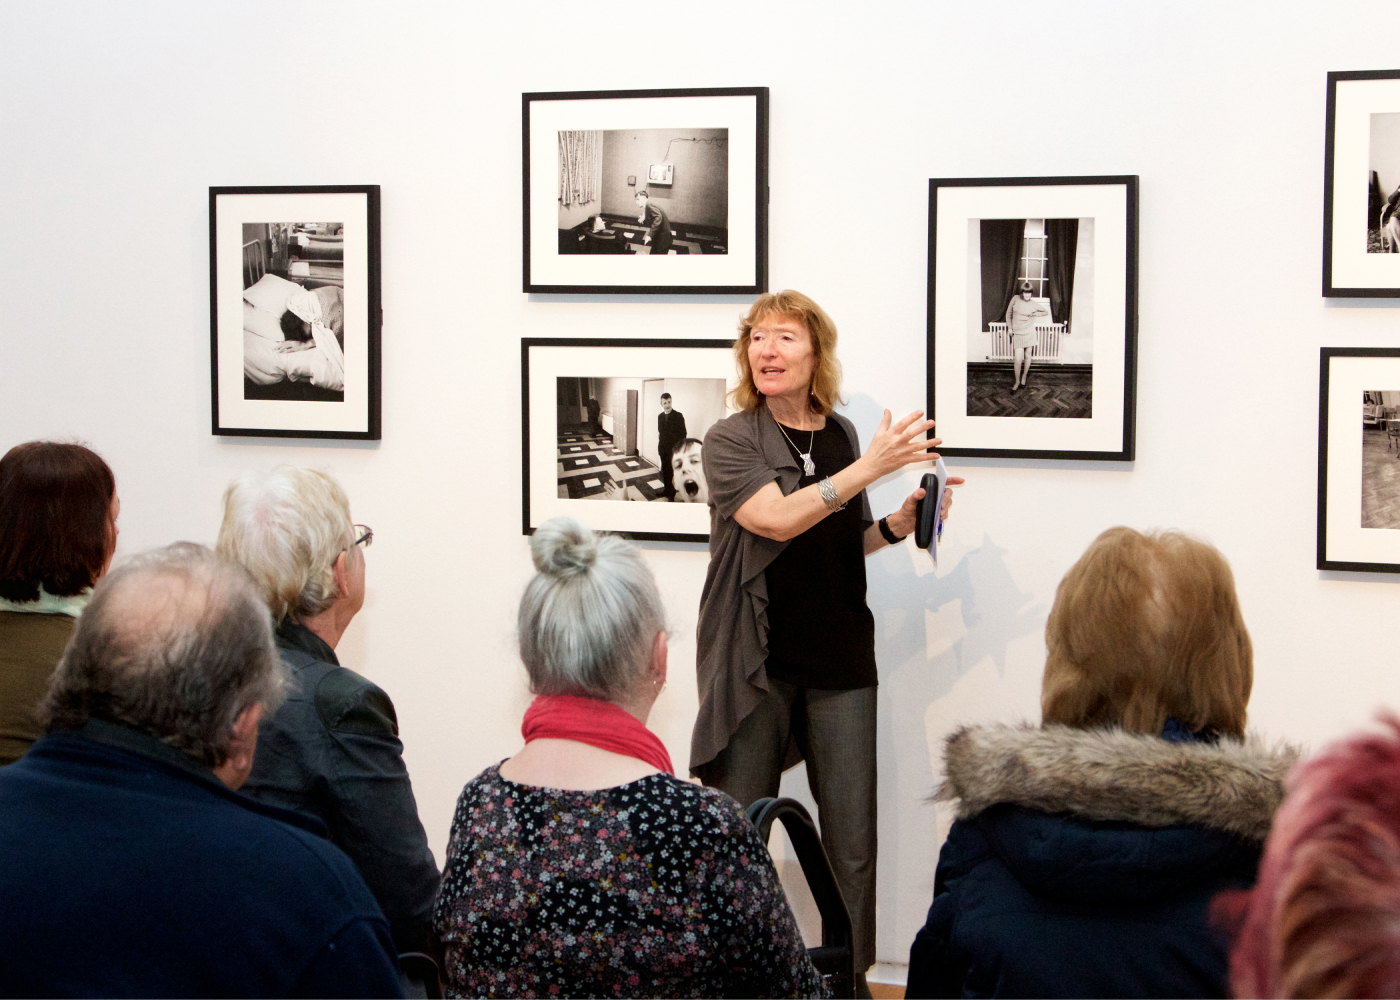 Anne Hornsby audio describing photographs by Martin Parr at an exhibition at Manchester Art Gallery to a group from Henshaws